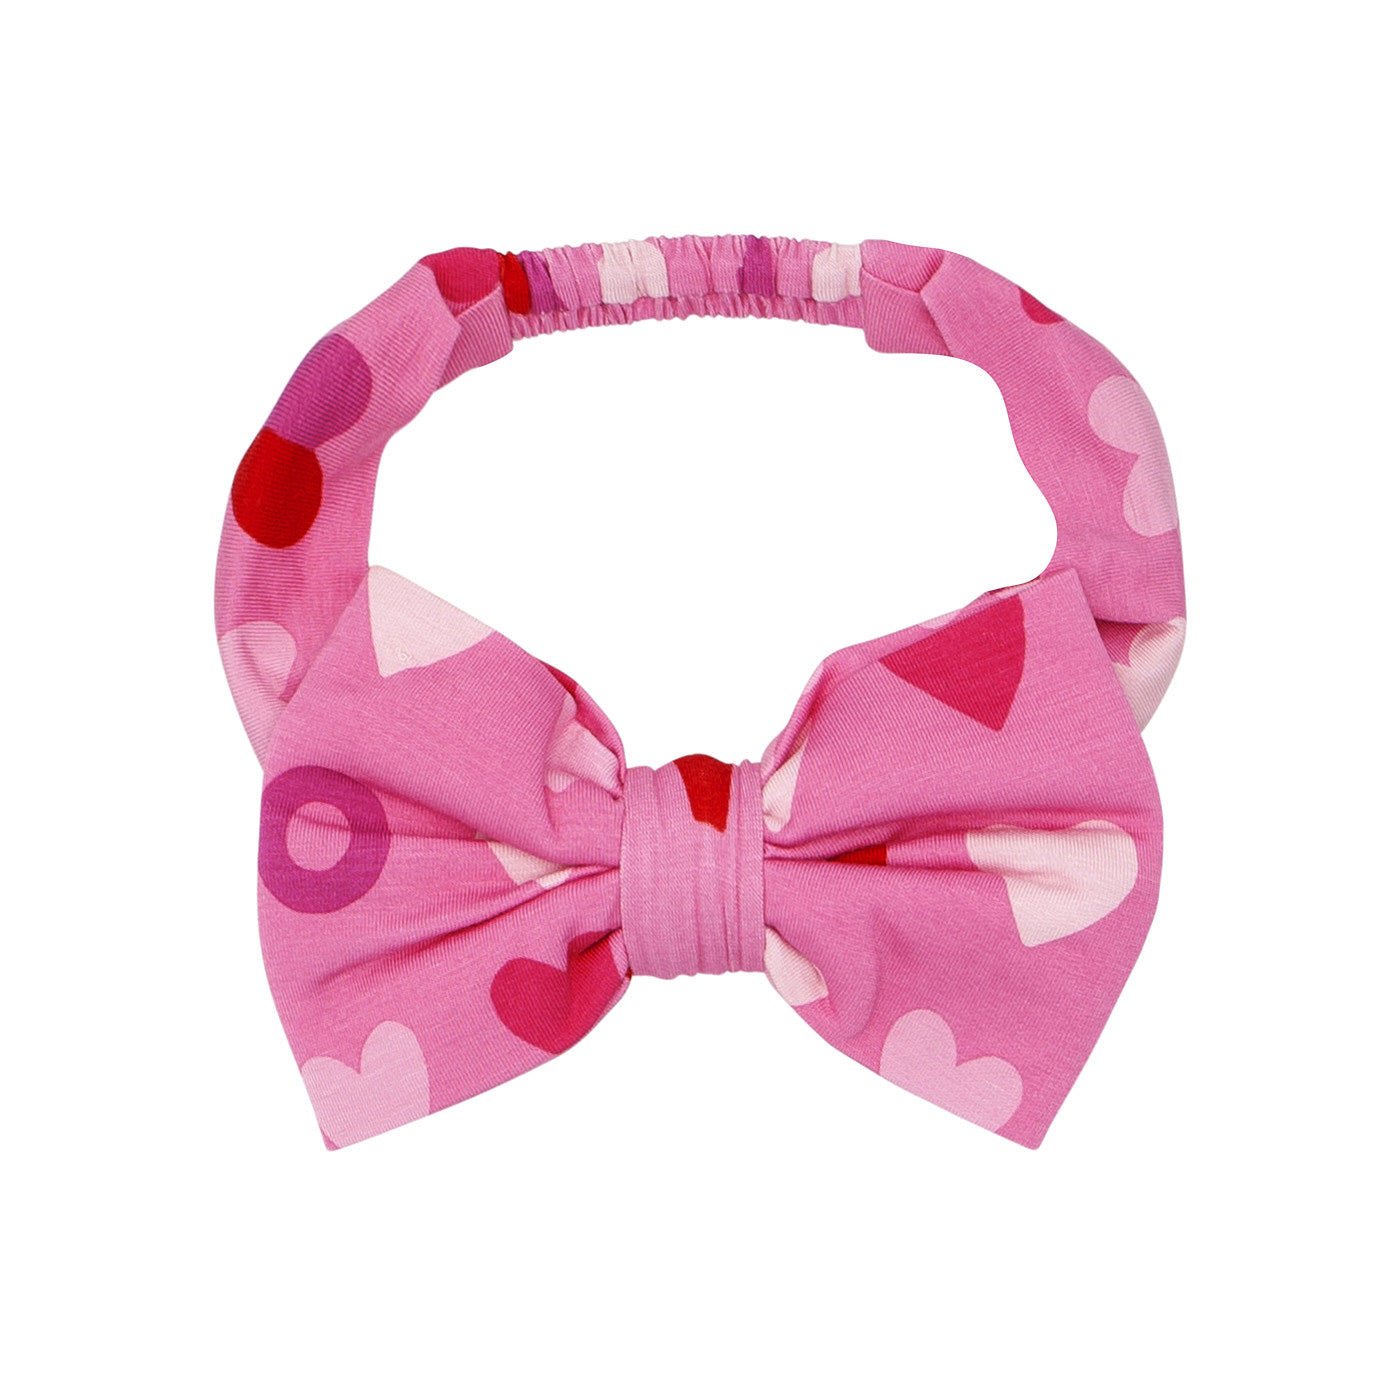 Flat lay image of Pink XOXO luxe bow headband in size age 4 to age 8